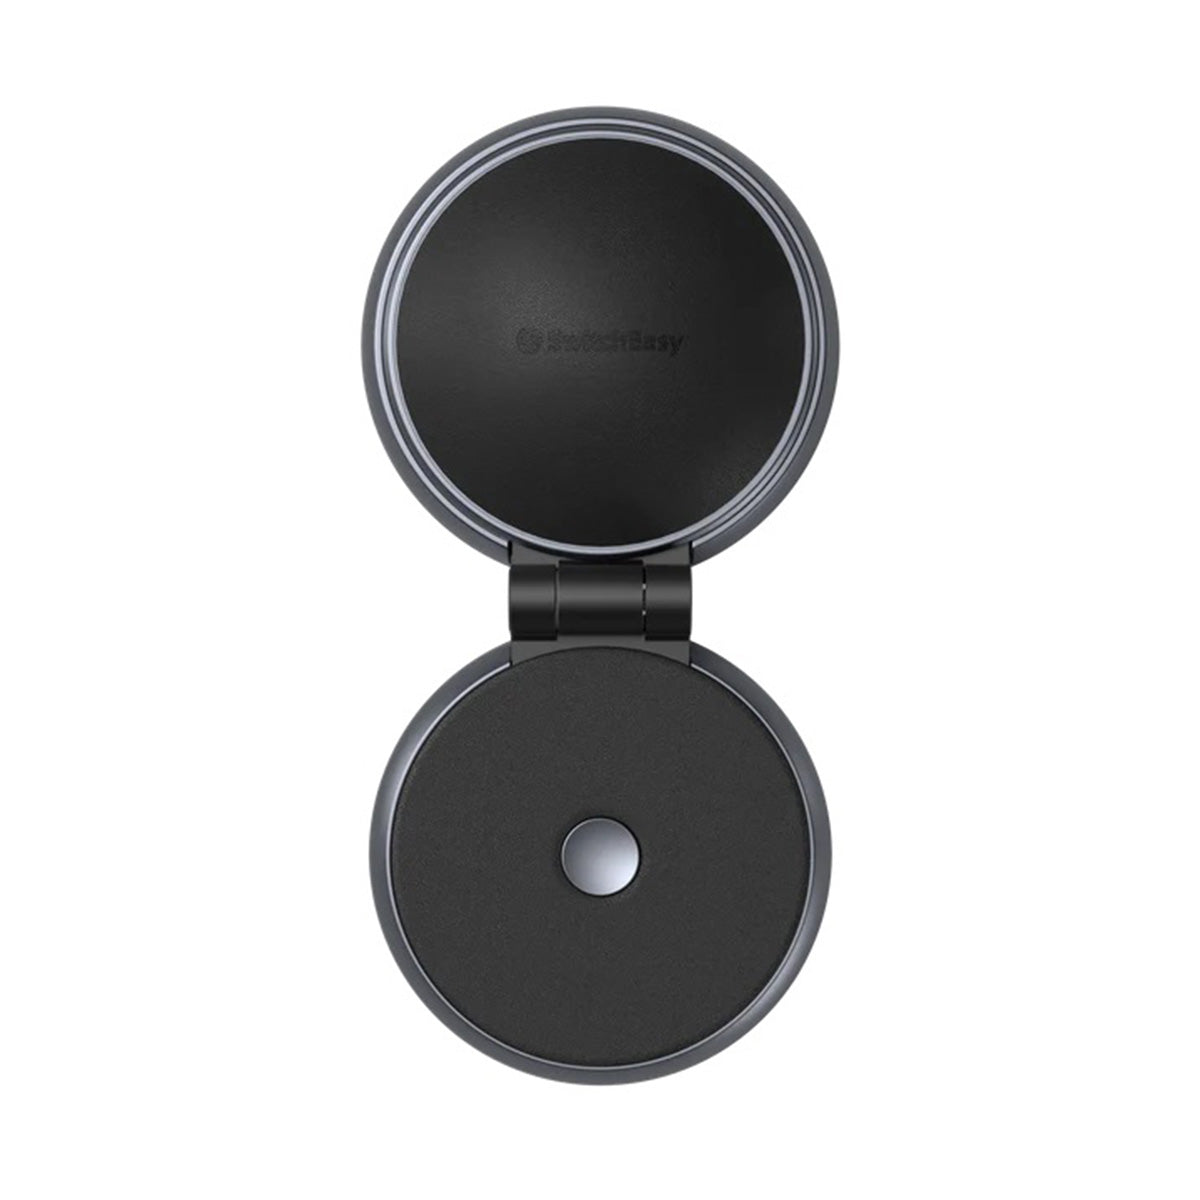 SwitchEasy Orbit Universal Magnetic Stand (Space Gray)